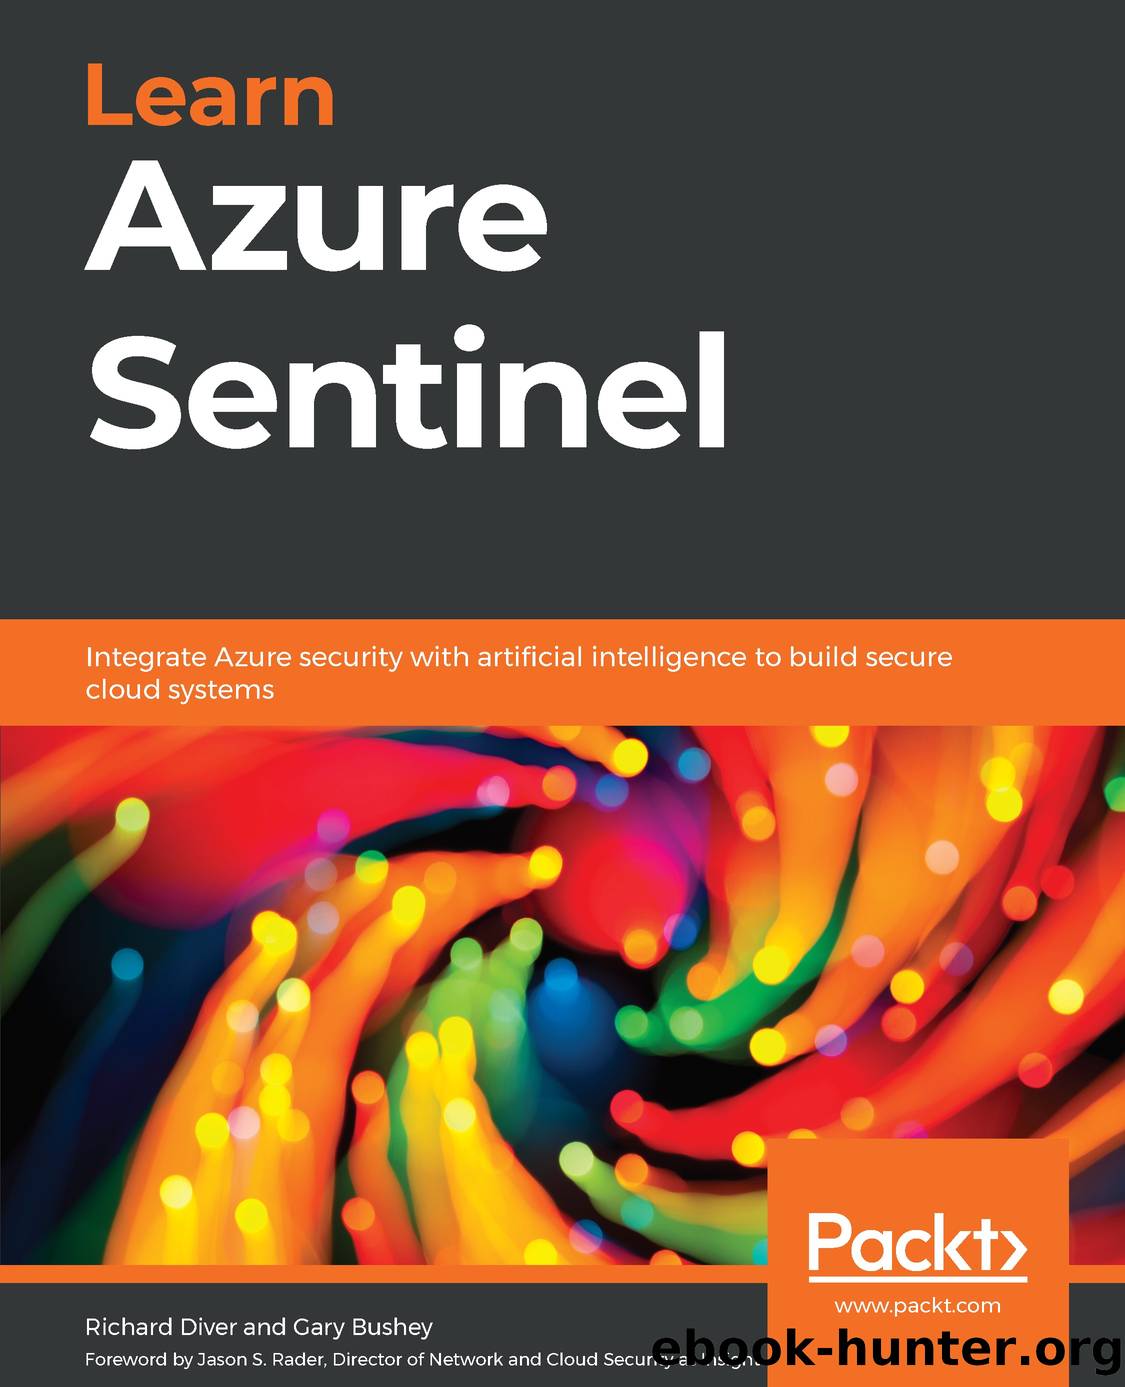 Learn Azure Sentinel by Richard Diver and Gary Bushey